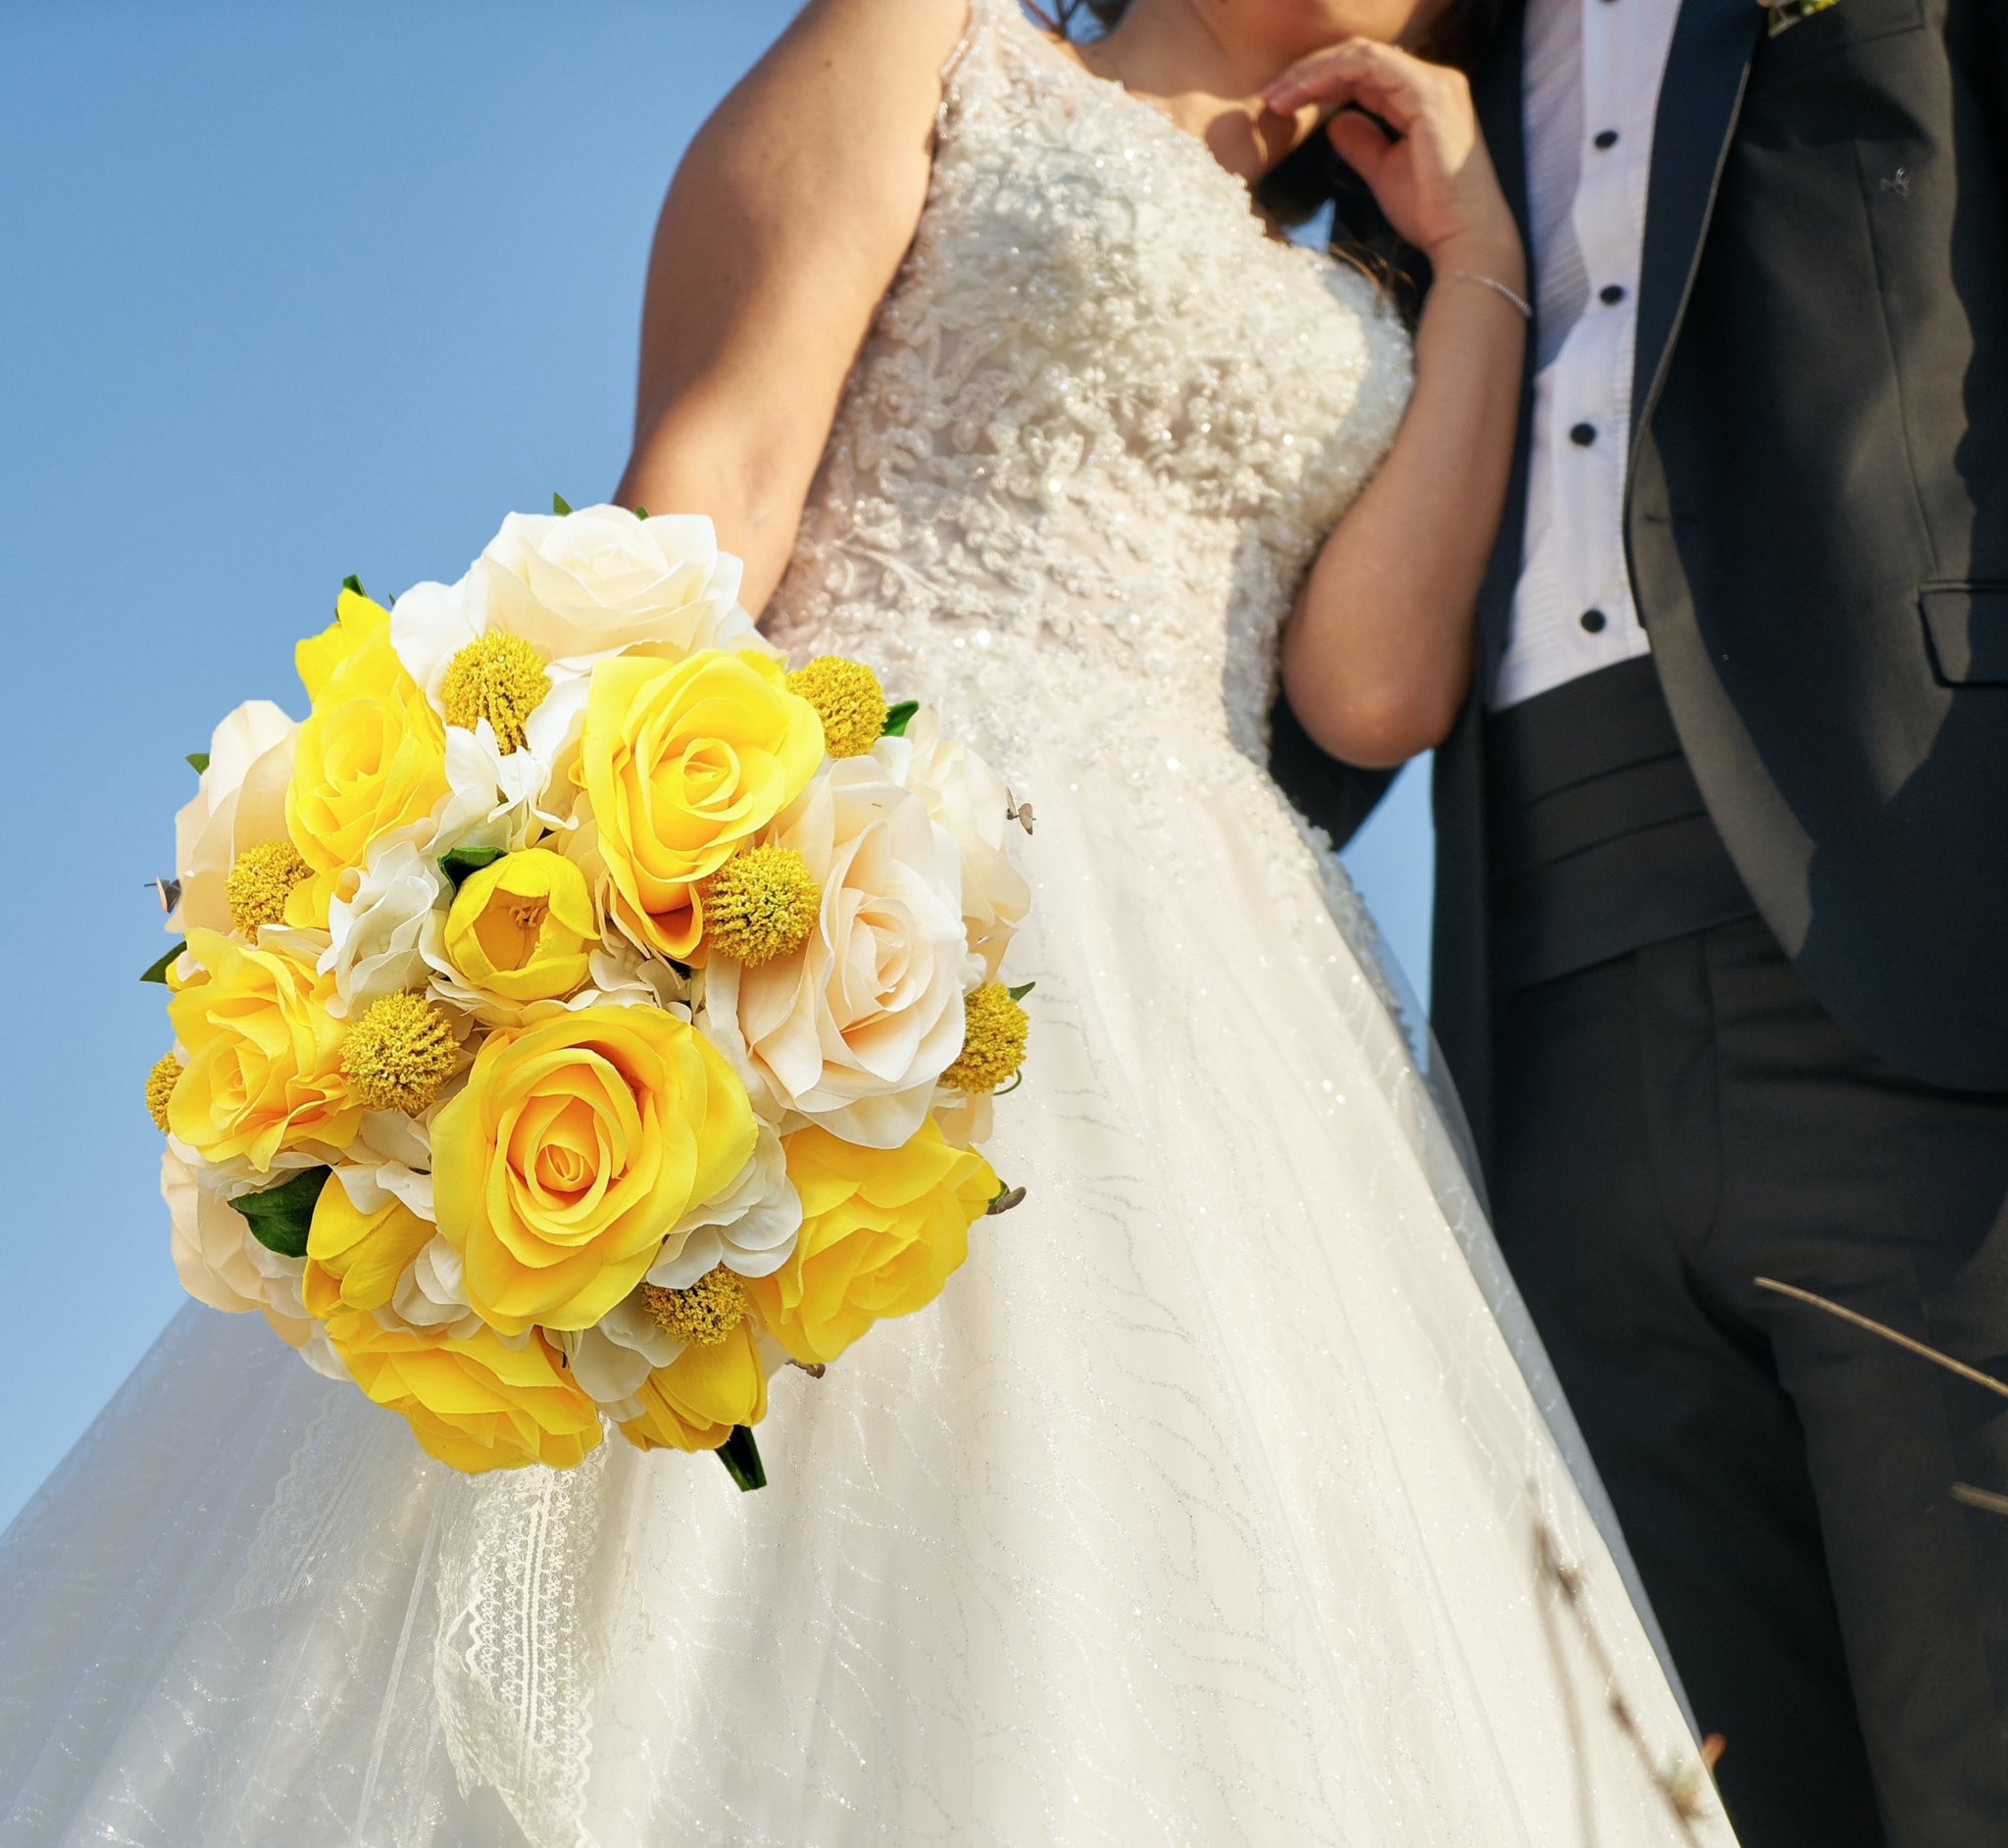 Yellow Ivory Bridal Bouquet Roses Craspedia Tulips - Add Bridesmaid Bouquets Wedding Corsages Boutonnieres Flower Crown Arch Flowers & More!